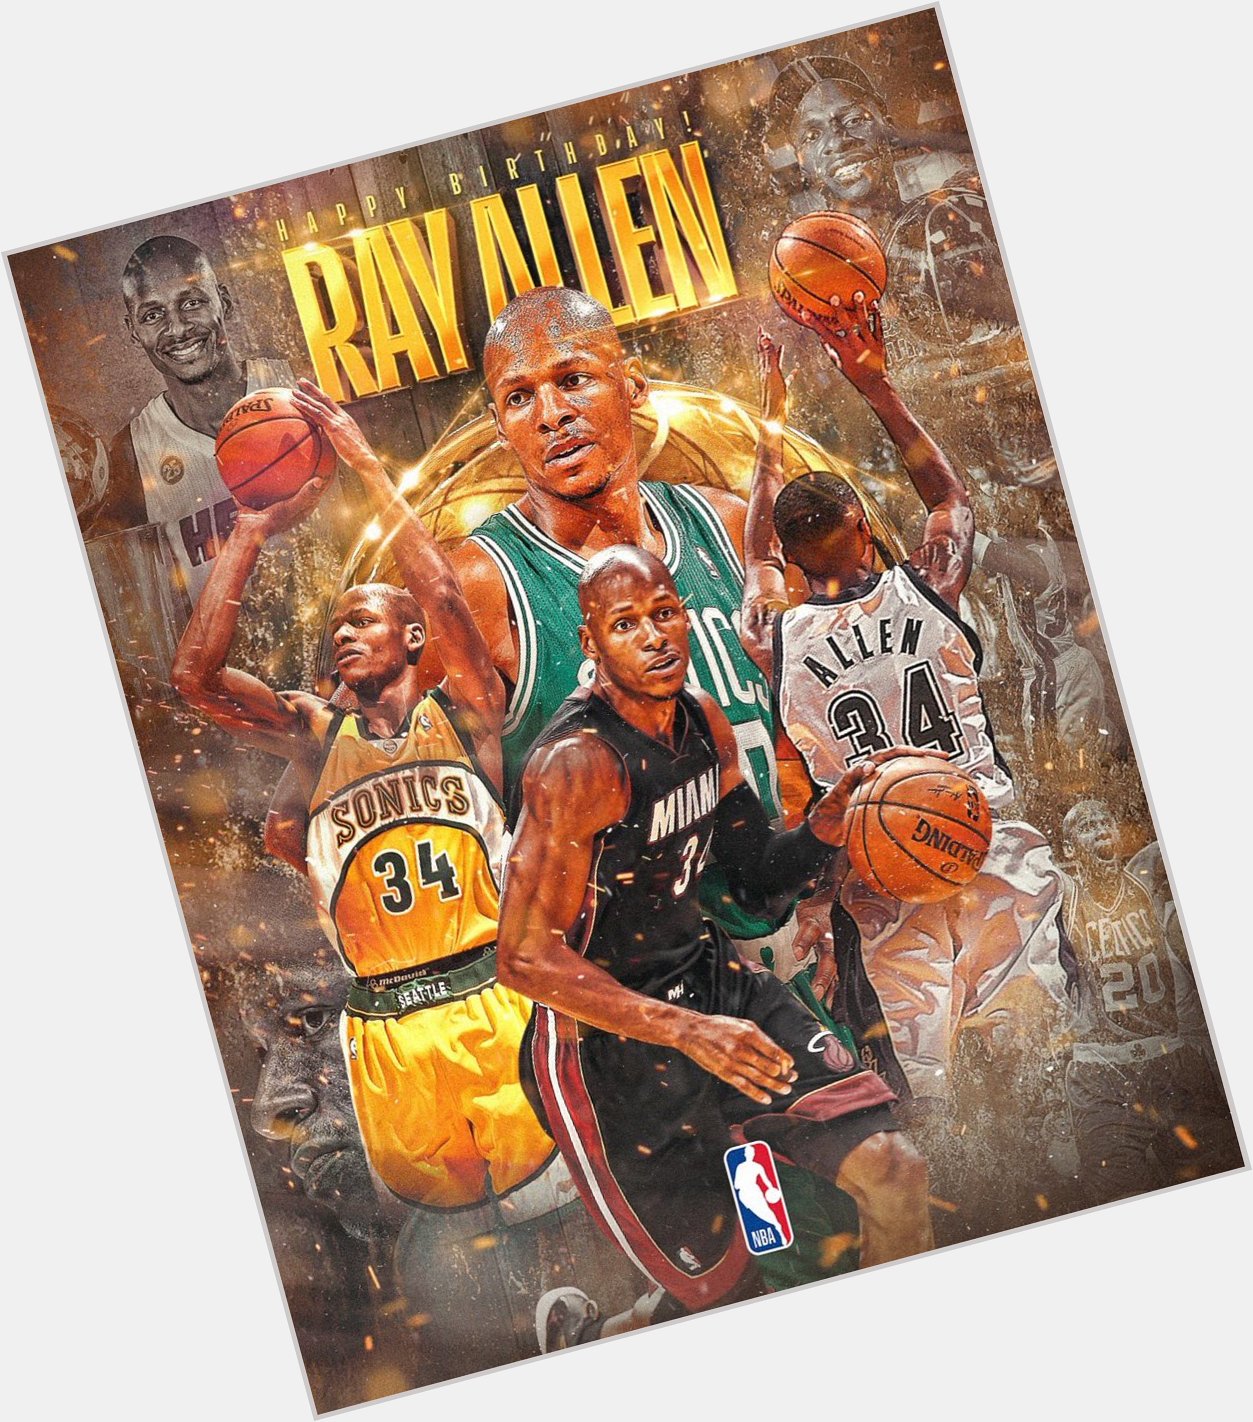 Join us in wishing Ray Allen, one of the games greatest sharpshooters, a HAPPY BIRTHDAY. 